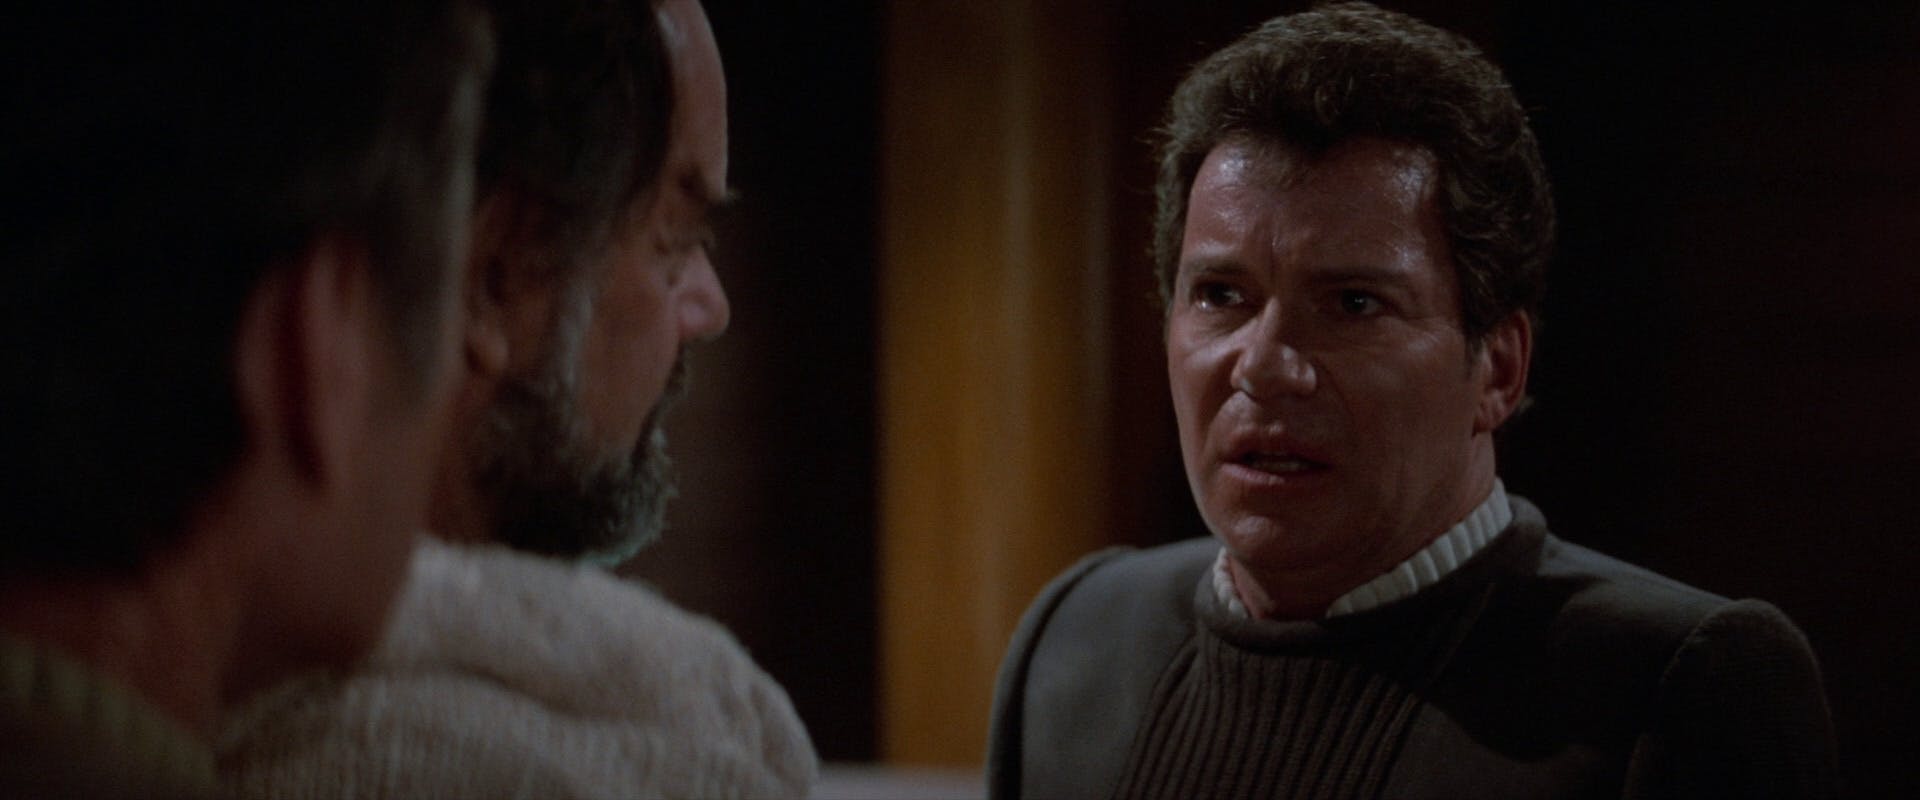 Kirk faces Sybok, as McCoy watches, telling him that he refuses to take away his pain in Star Trek V: The Final Frontier